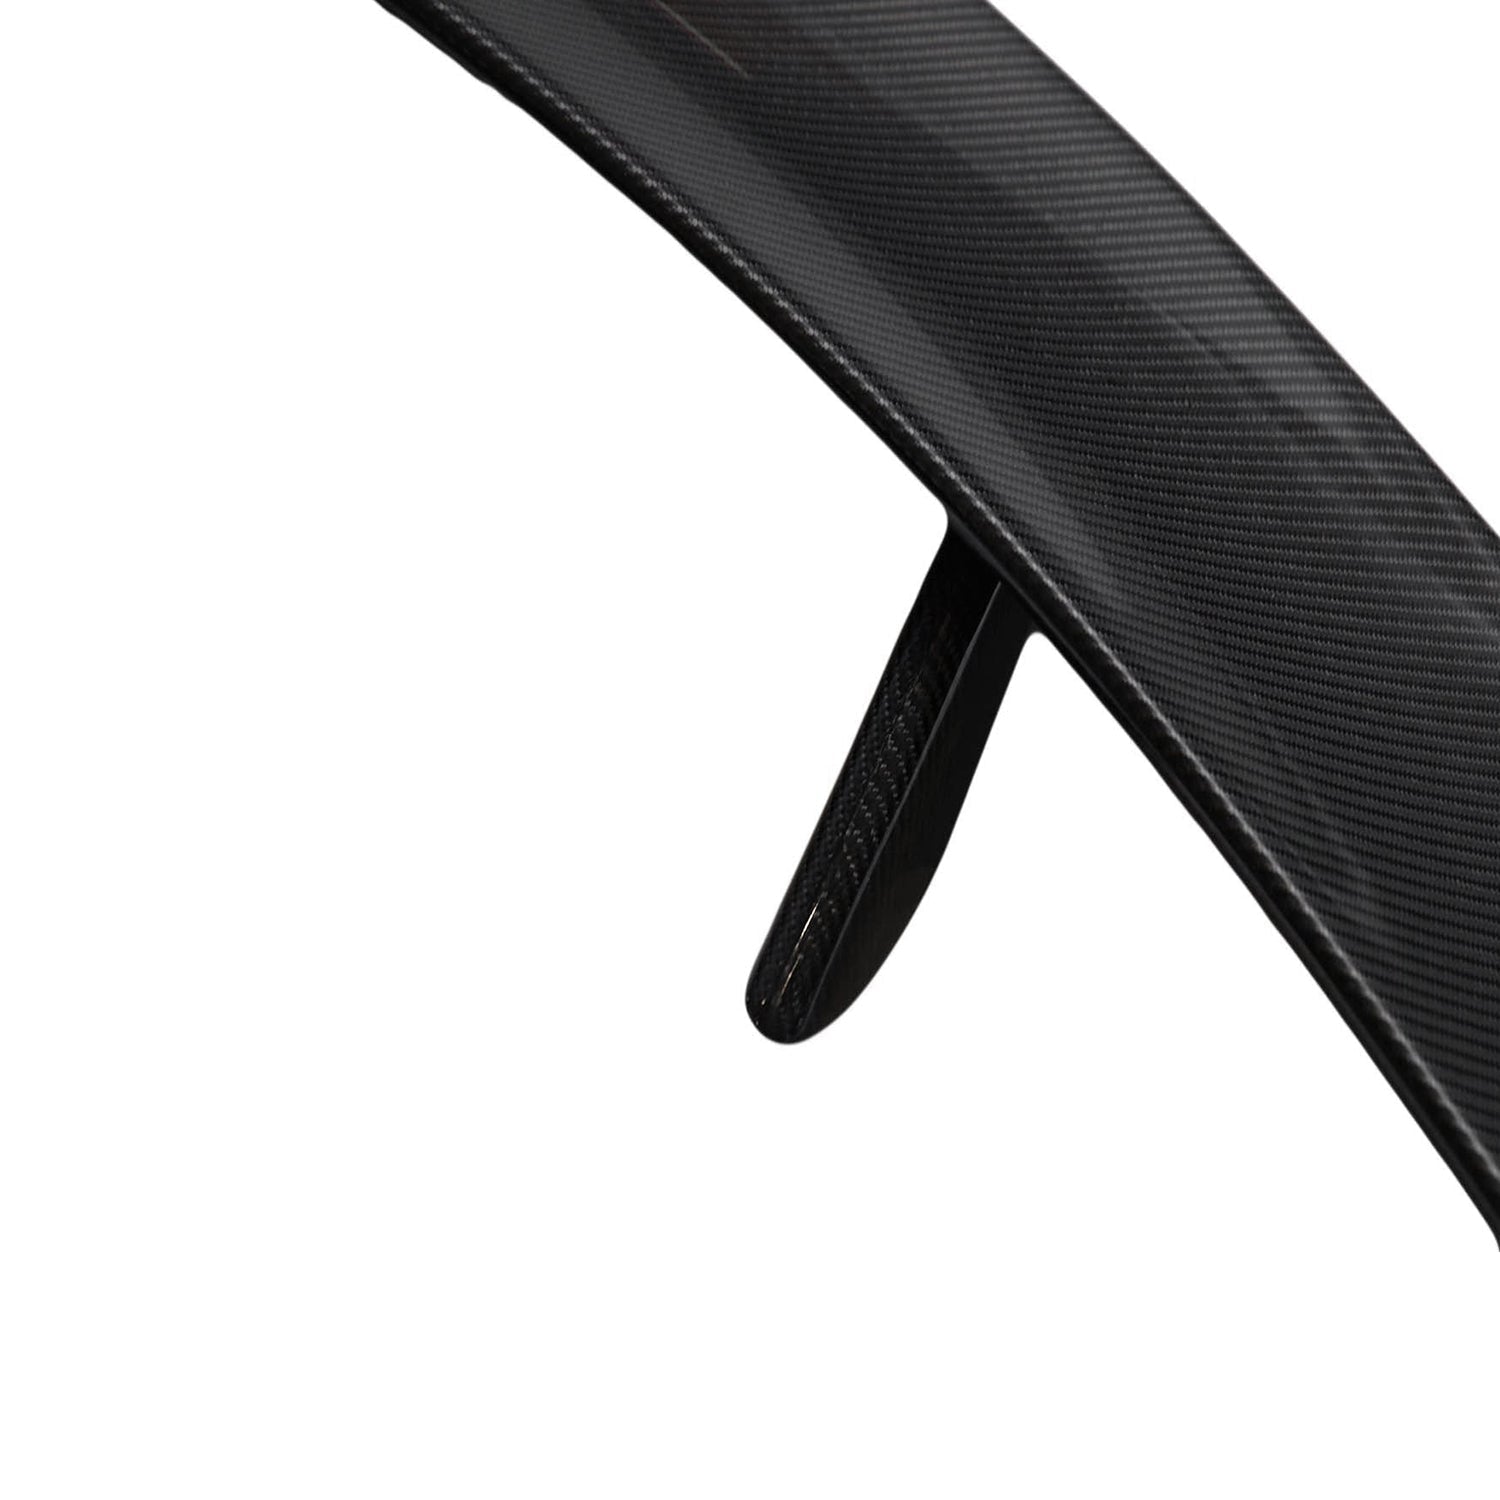 MHC Toyota Supra Rear Wing In Gloss Carbon Fibre (A90)-R44 Performance